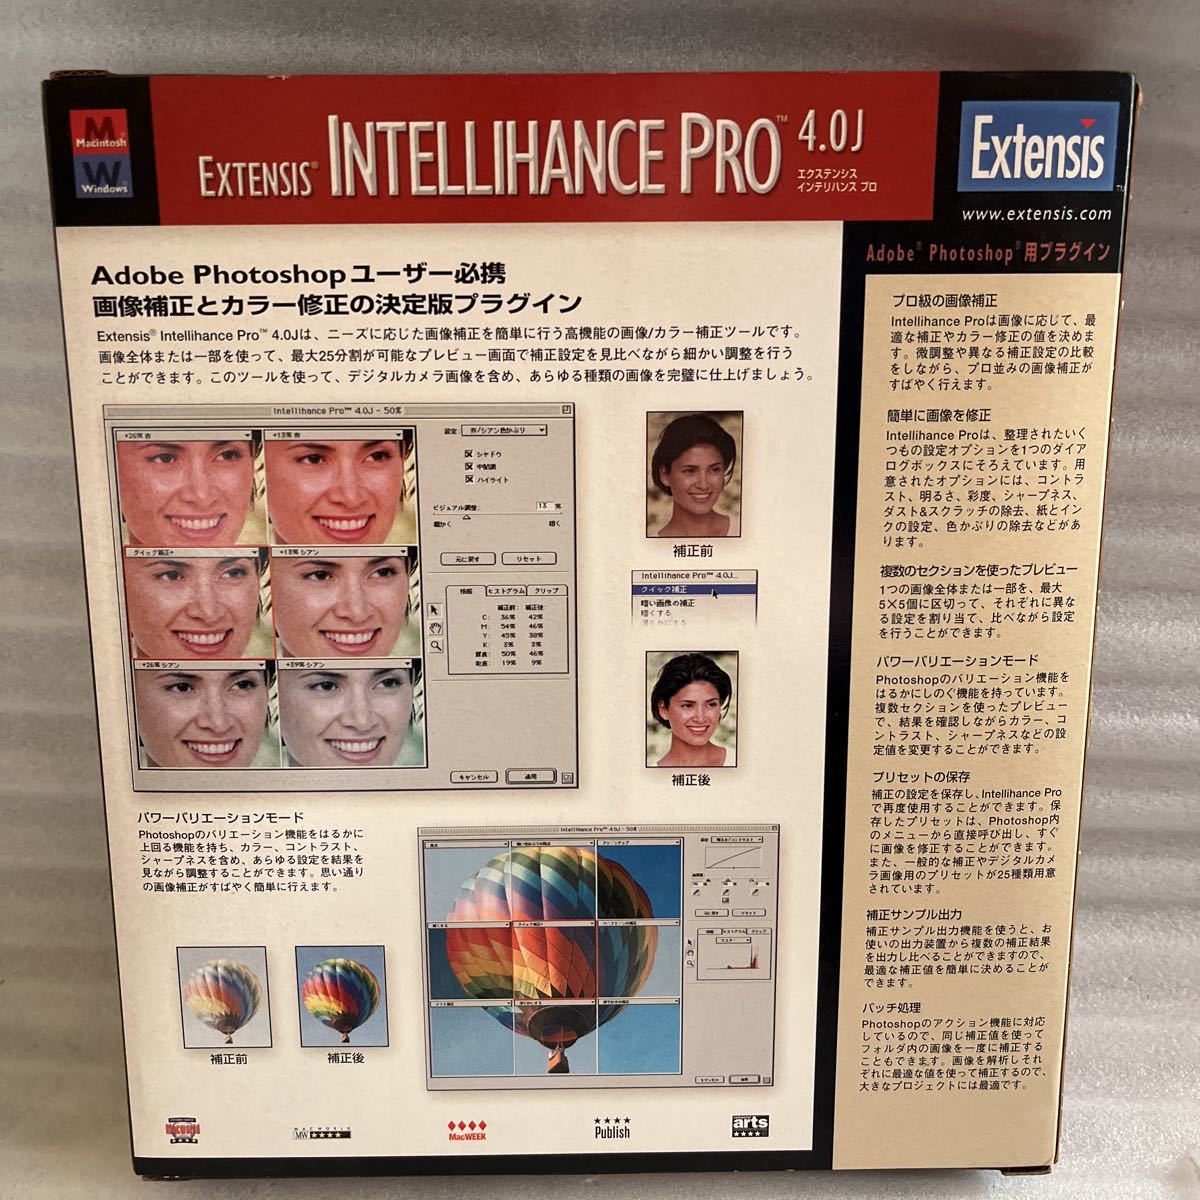  software EXTENSIS INTELLIHANCE PRO 4.0J adobe user certainly . image correction color modification editing personal computer PC business business use 1 start present condition goods 